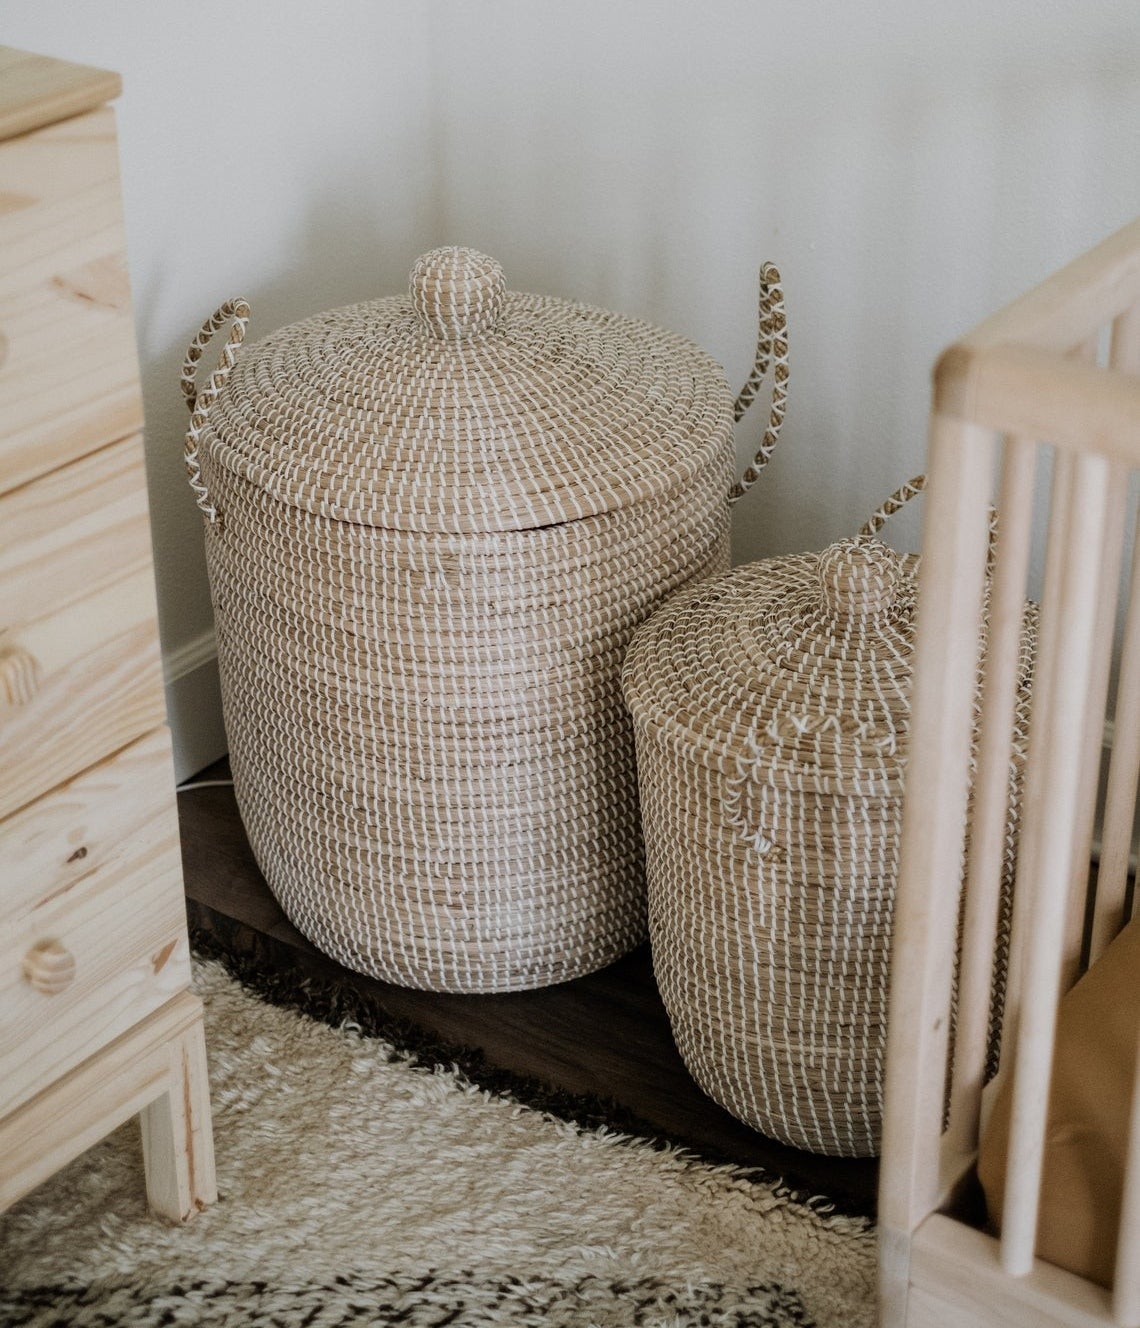 Medium and large white and light brown woven vertical baskets with handles and lids